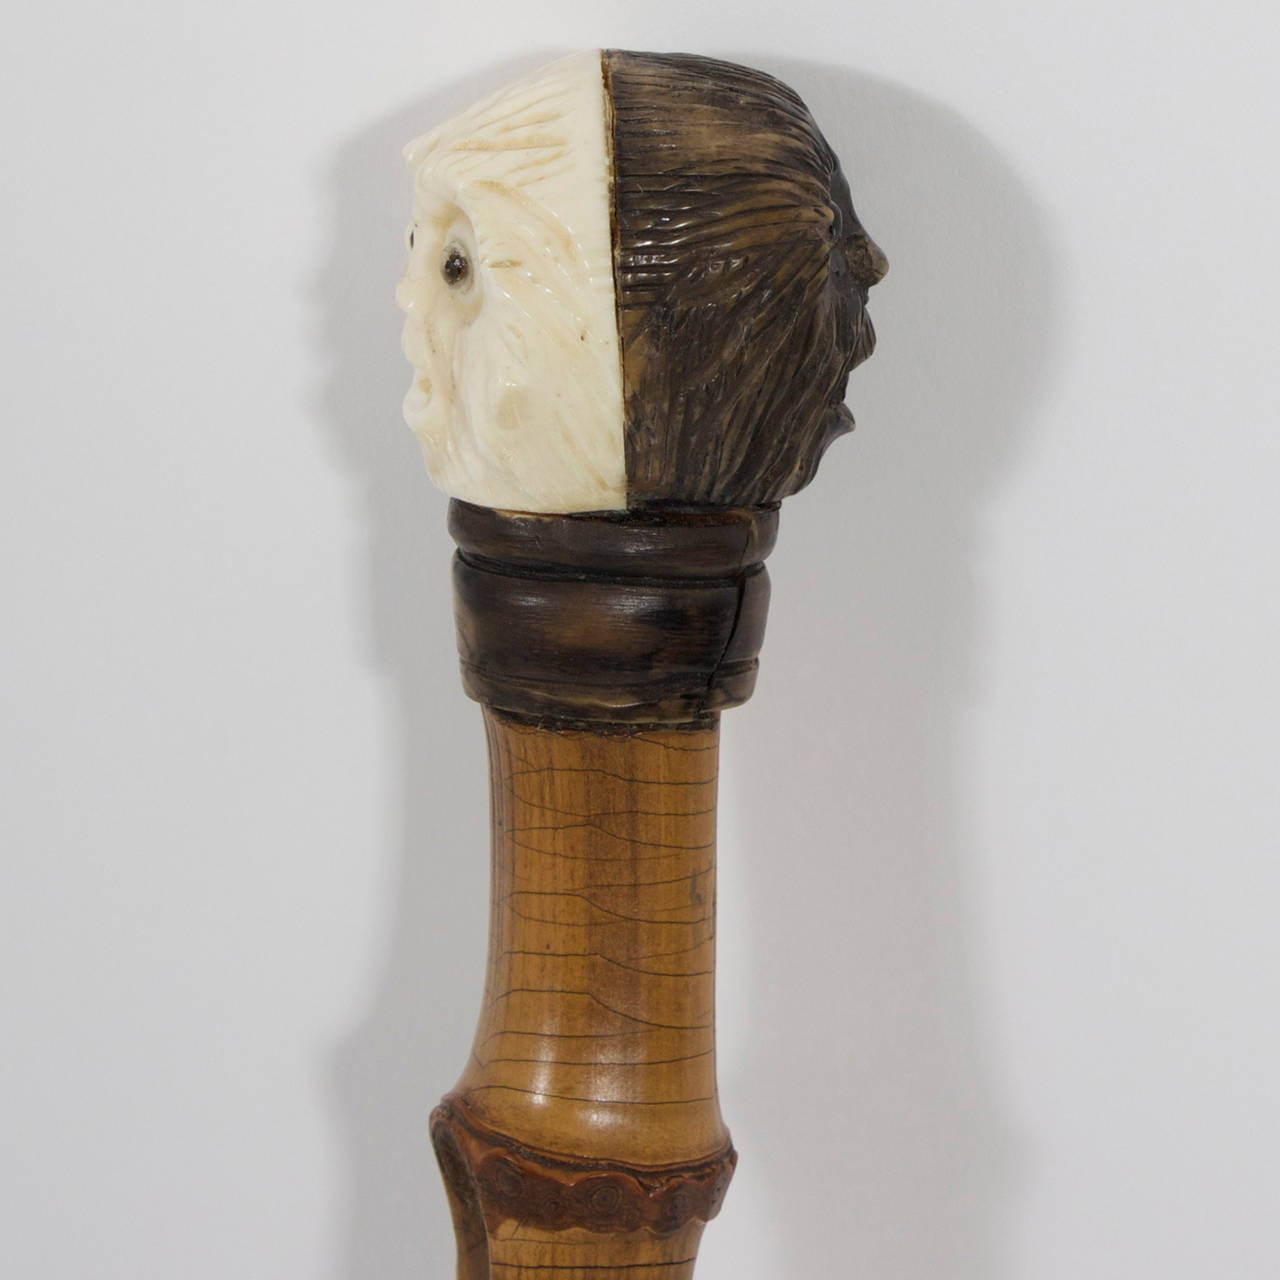 Humorous, vintage walking stick or cane with a two faced black or white surprised monkey as a handle and a bamboo shaft that is full of personality. A great example of the art of cane making.